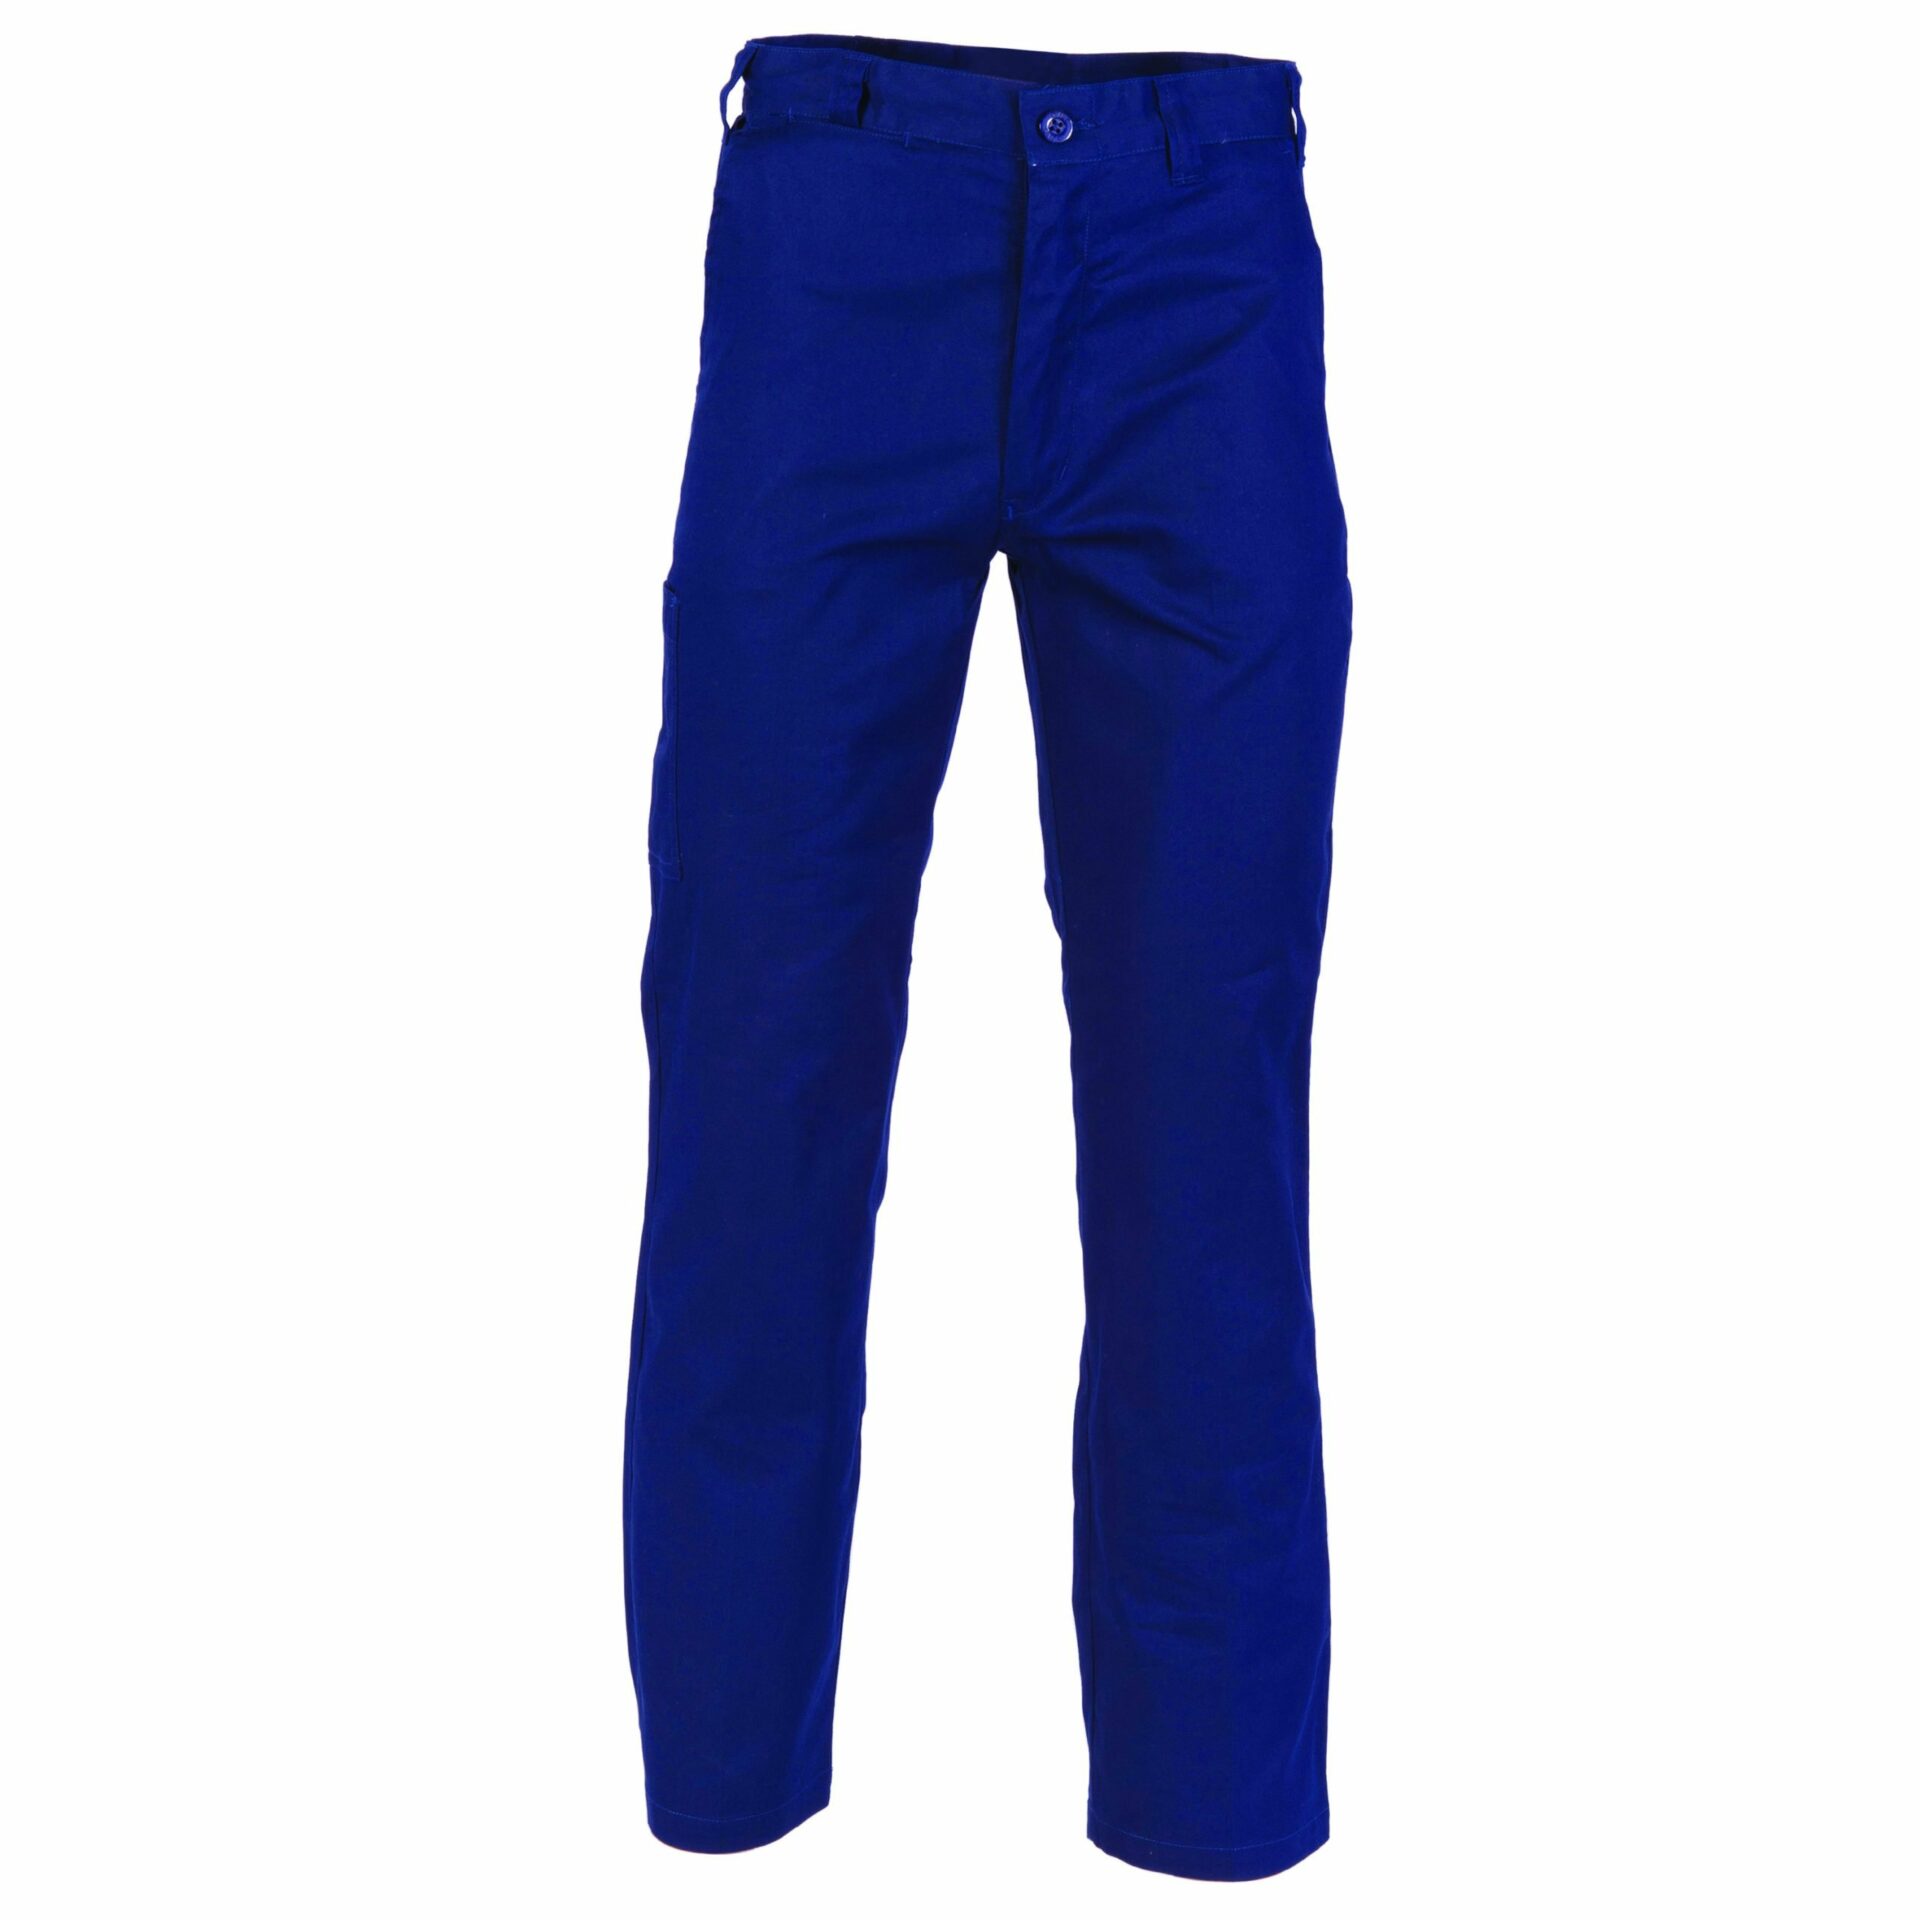 Buy 3329-L/w Drill Trousers at Best Price - AJ Safety